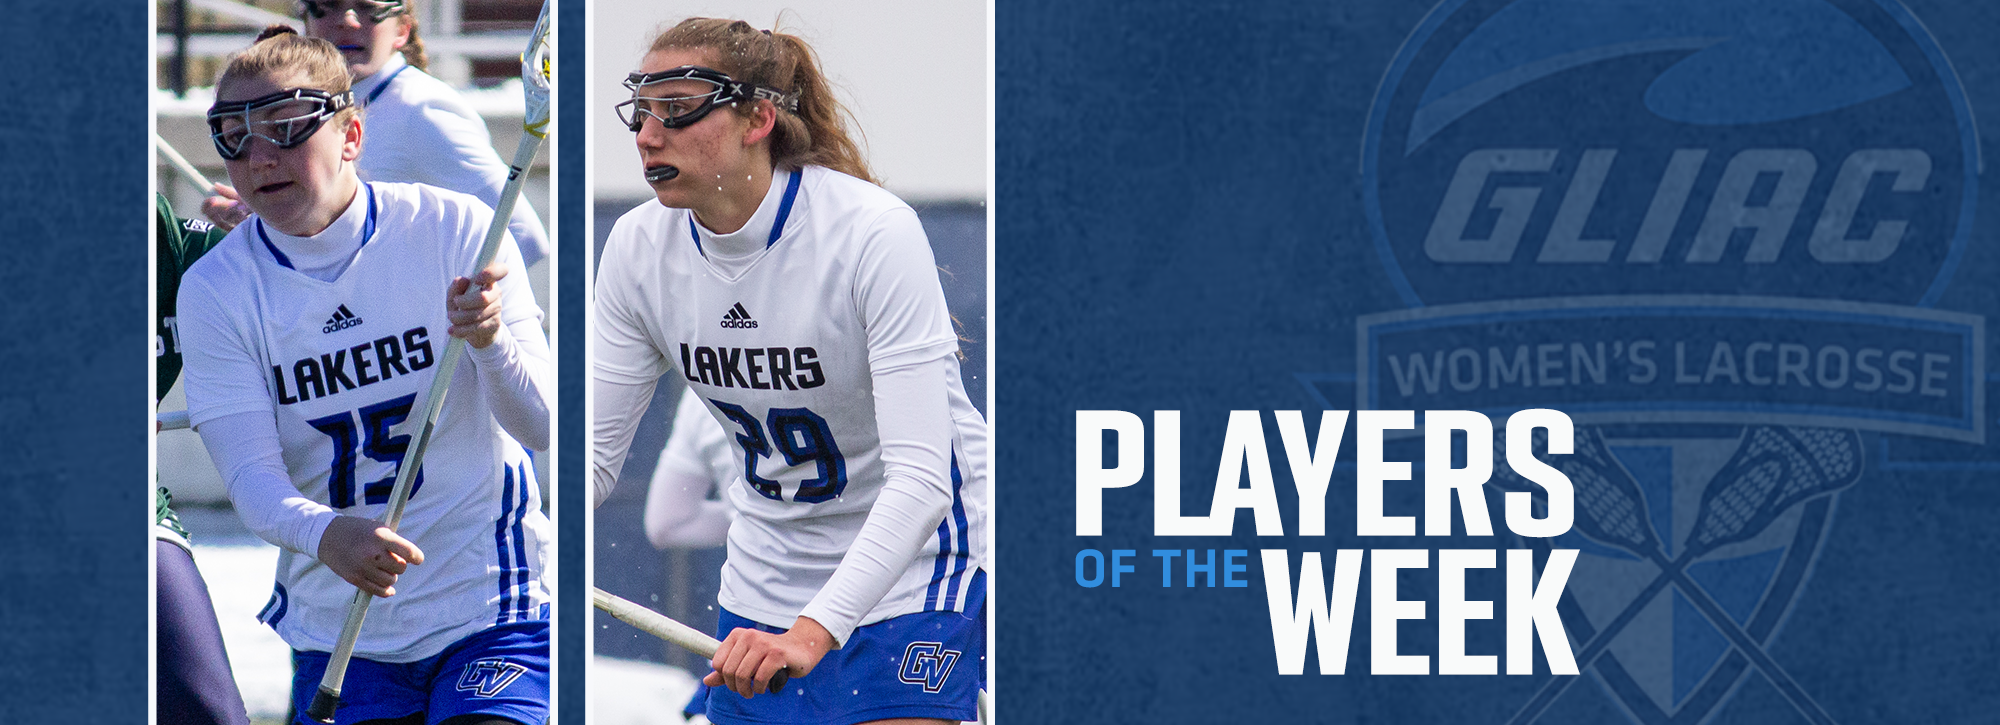 GVSU's Bursinger and Rothe honored with women's lacrosse weekly awards